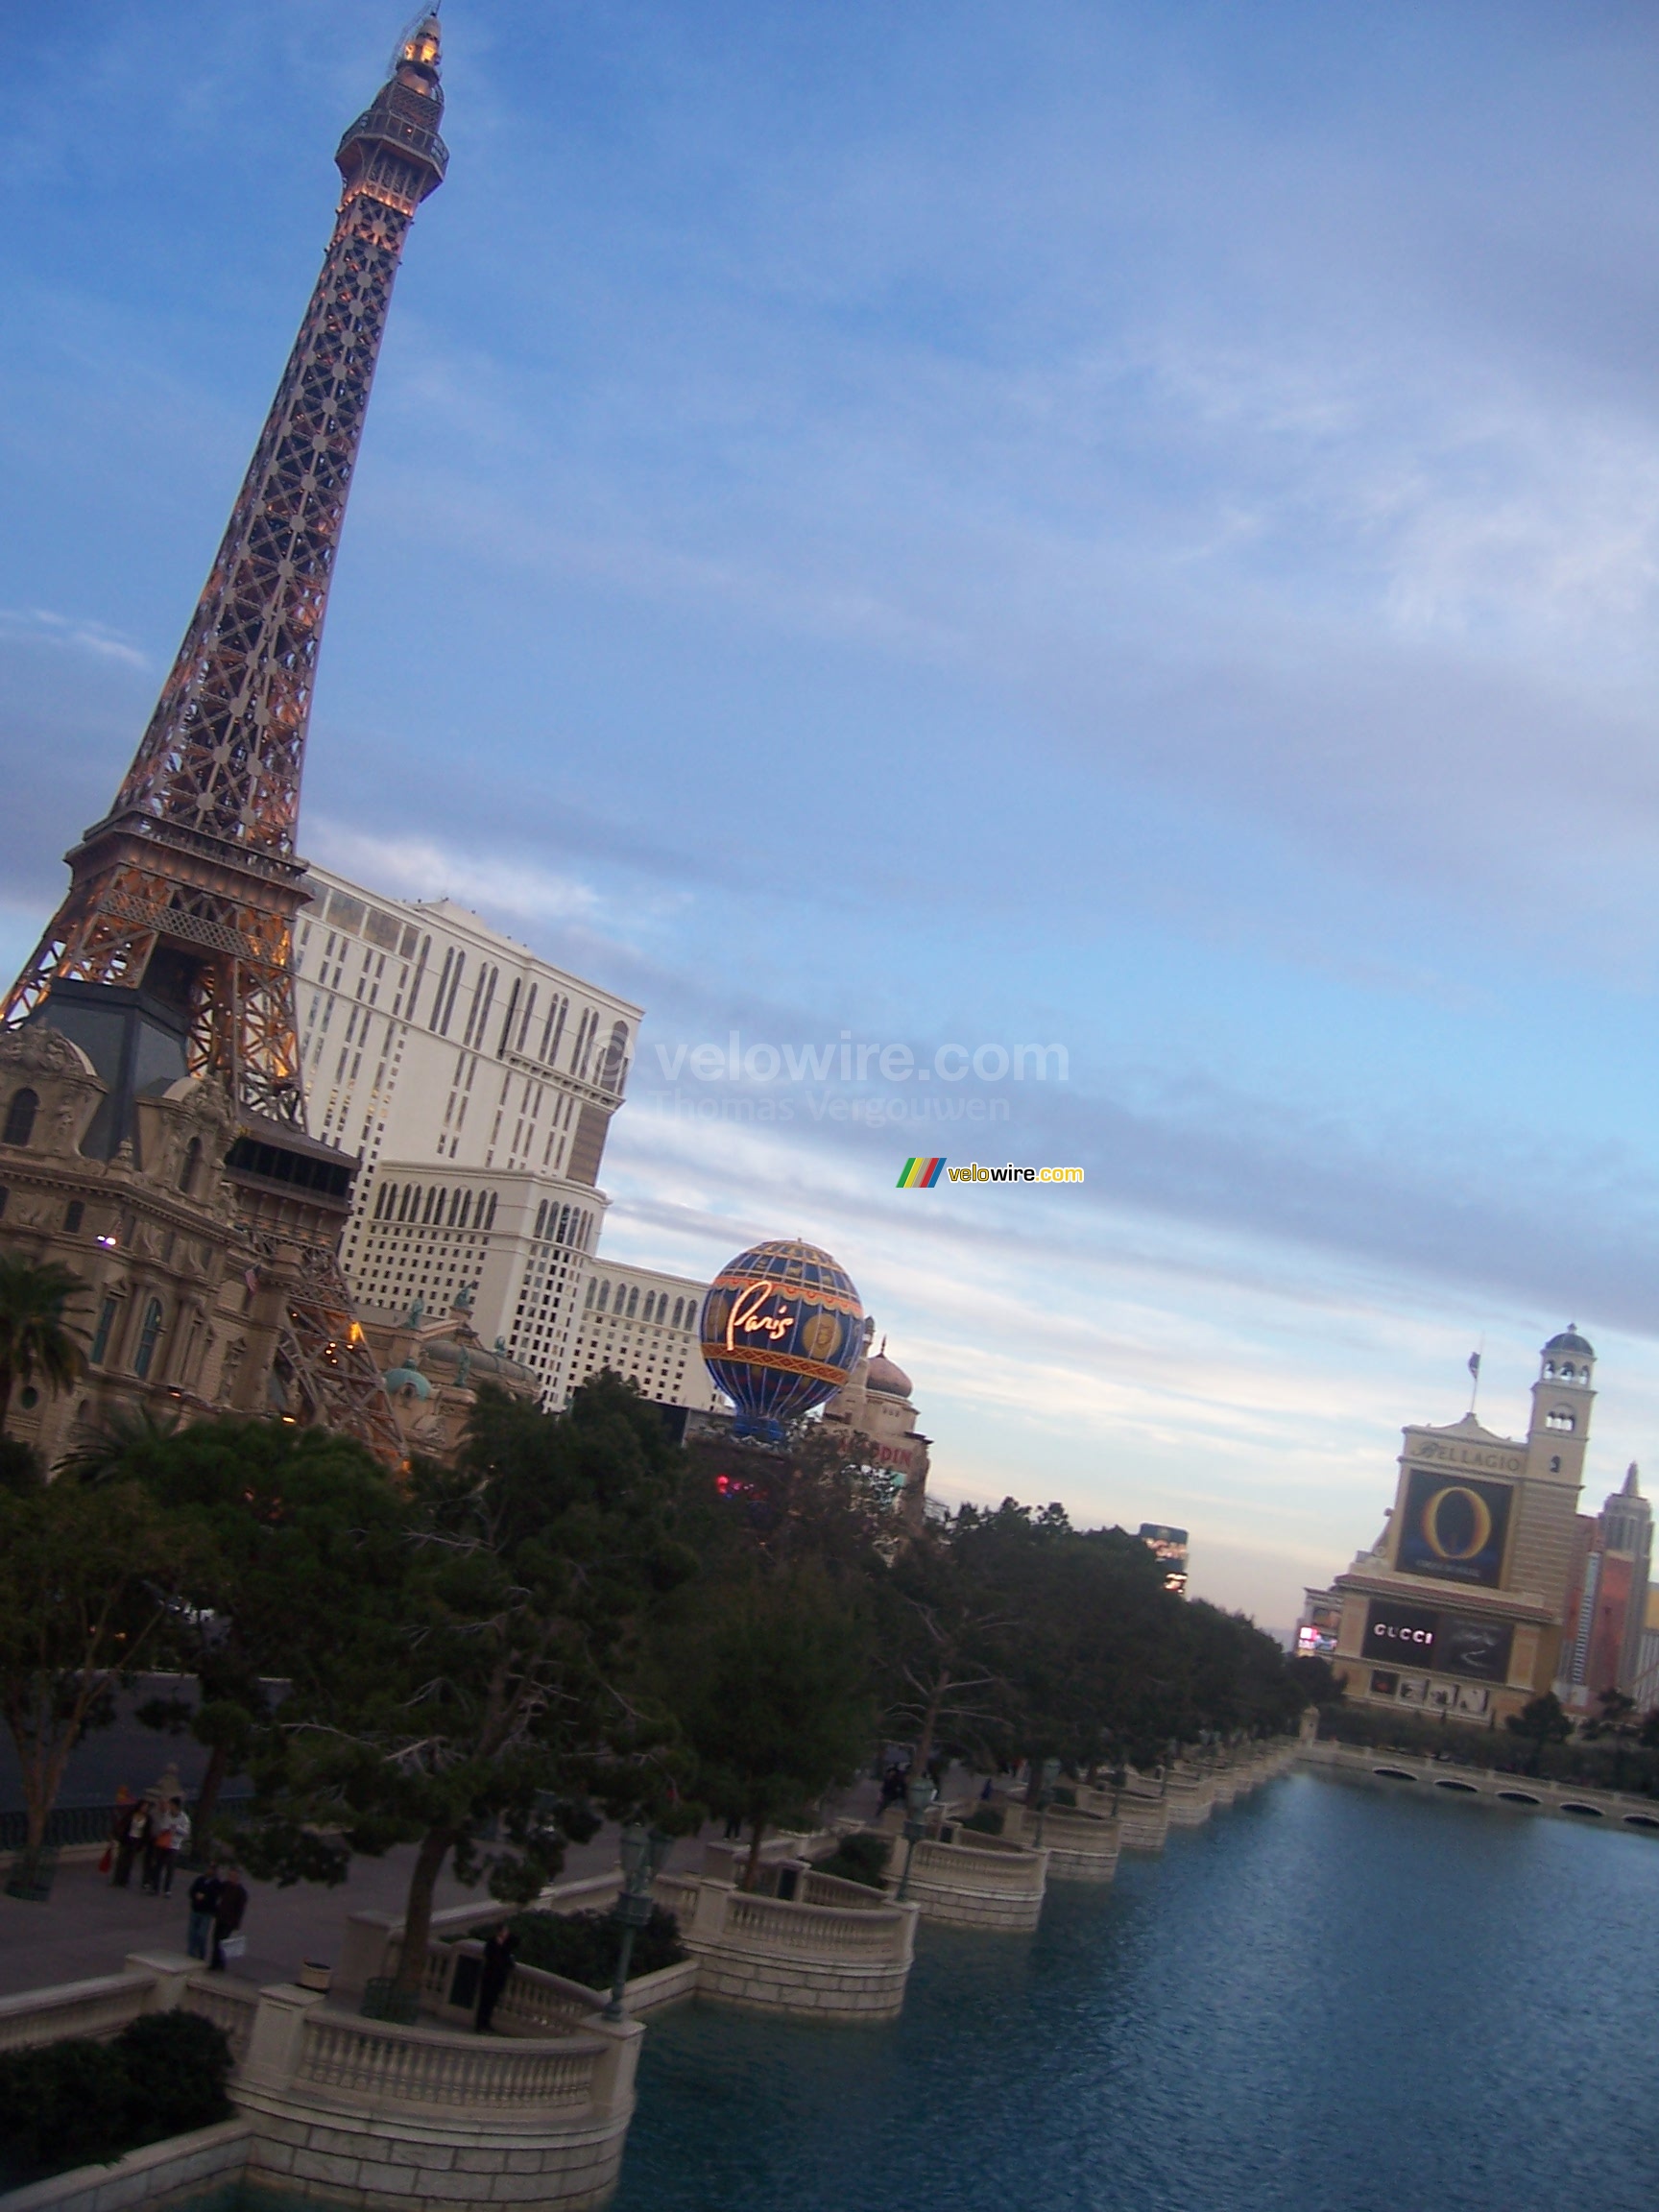 On the left Paris with the Eiffel Tower, on the right the entrance of the Bellagio